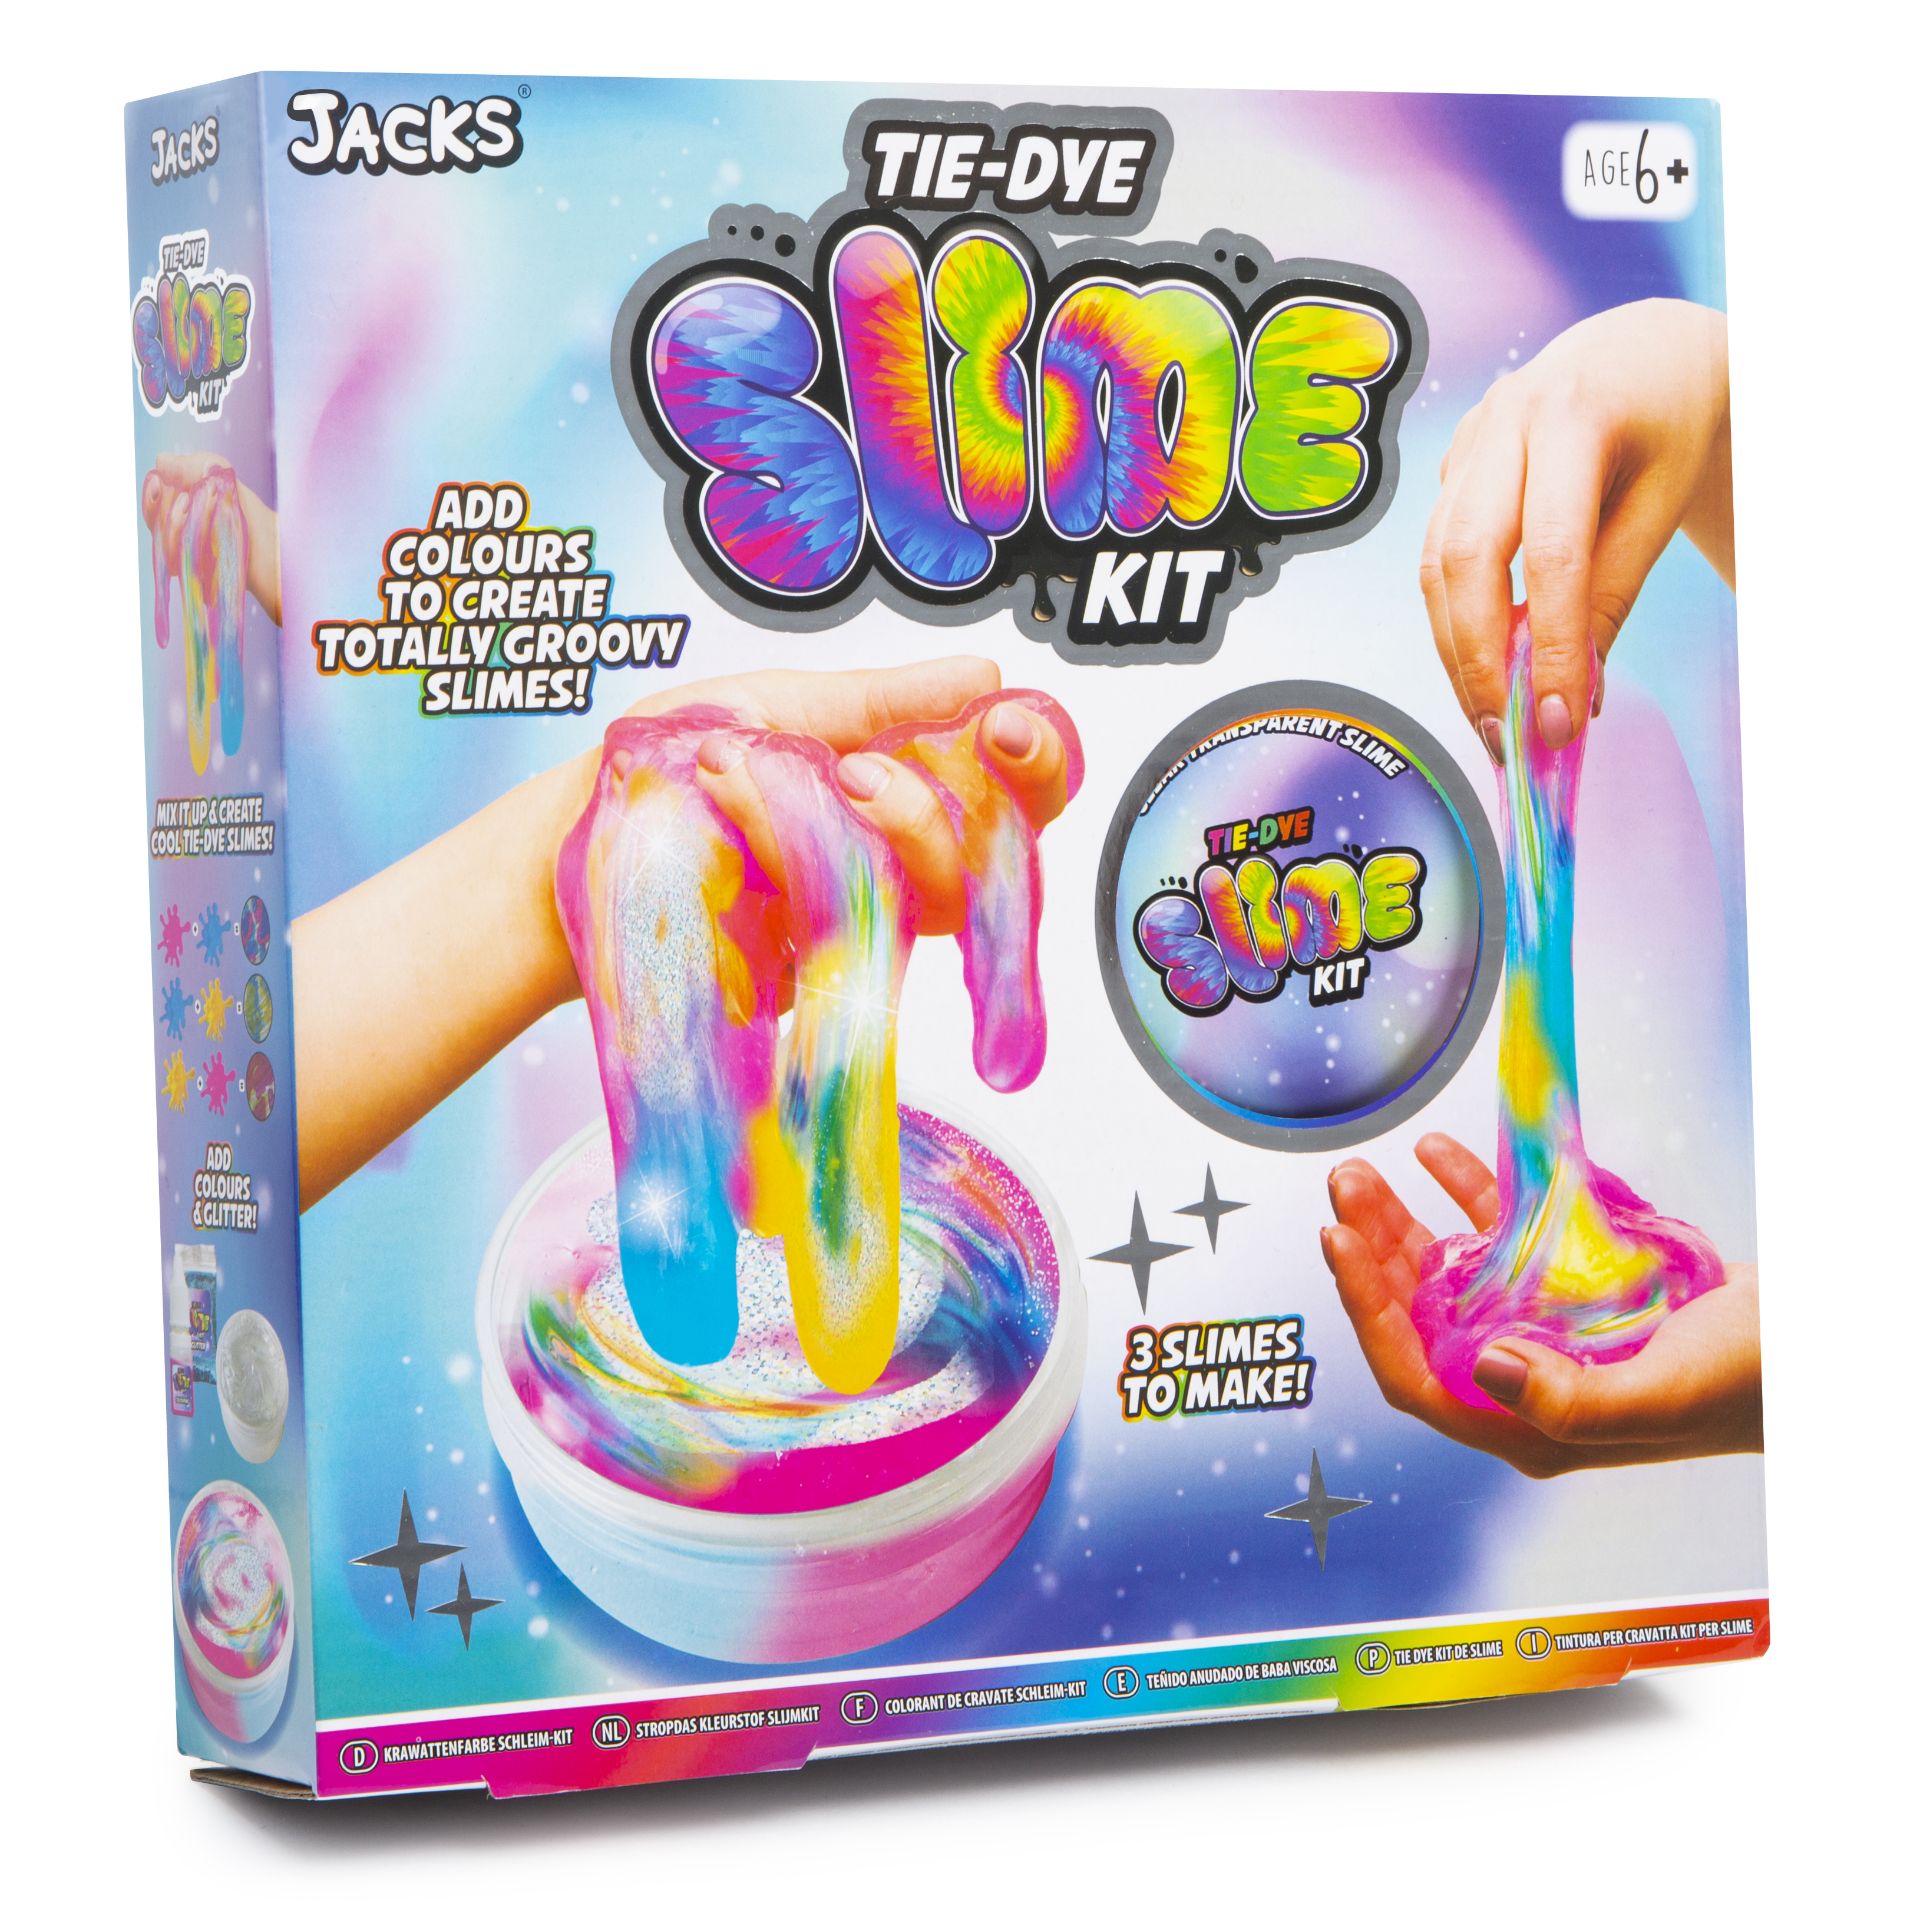 NEW WEIRD SCIENCE TIE-DYE SLIME KIT INCLUDES 3 COLOURS & GLITTERED DYES